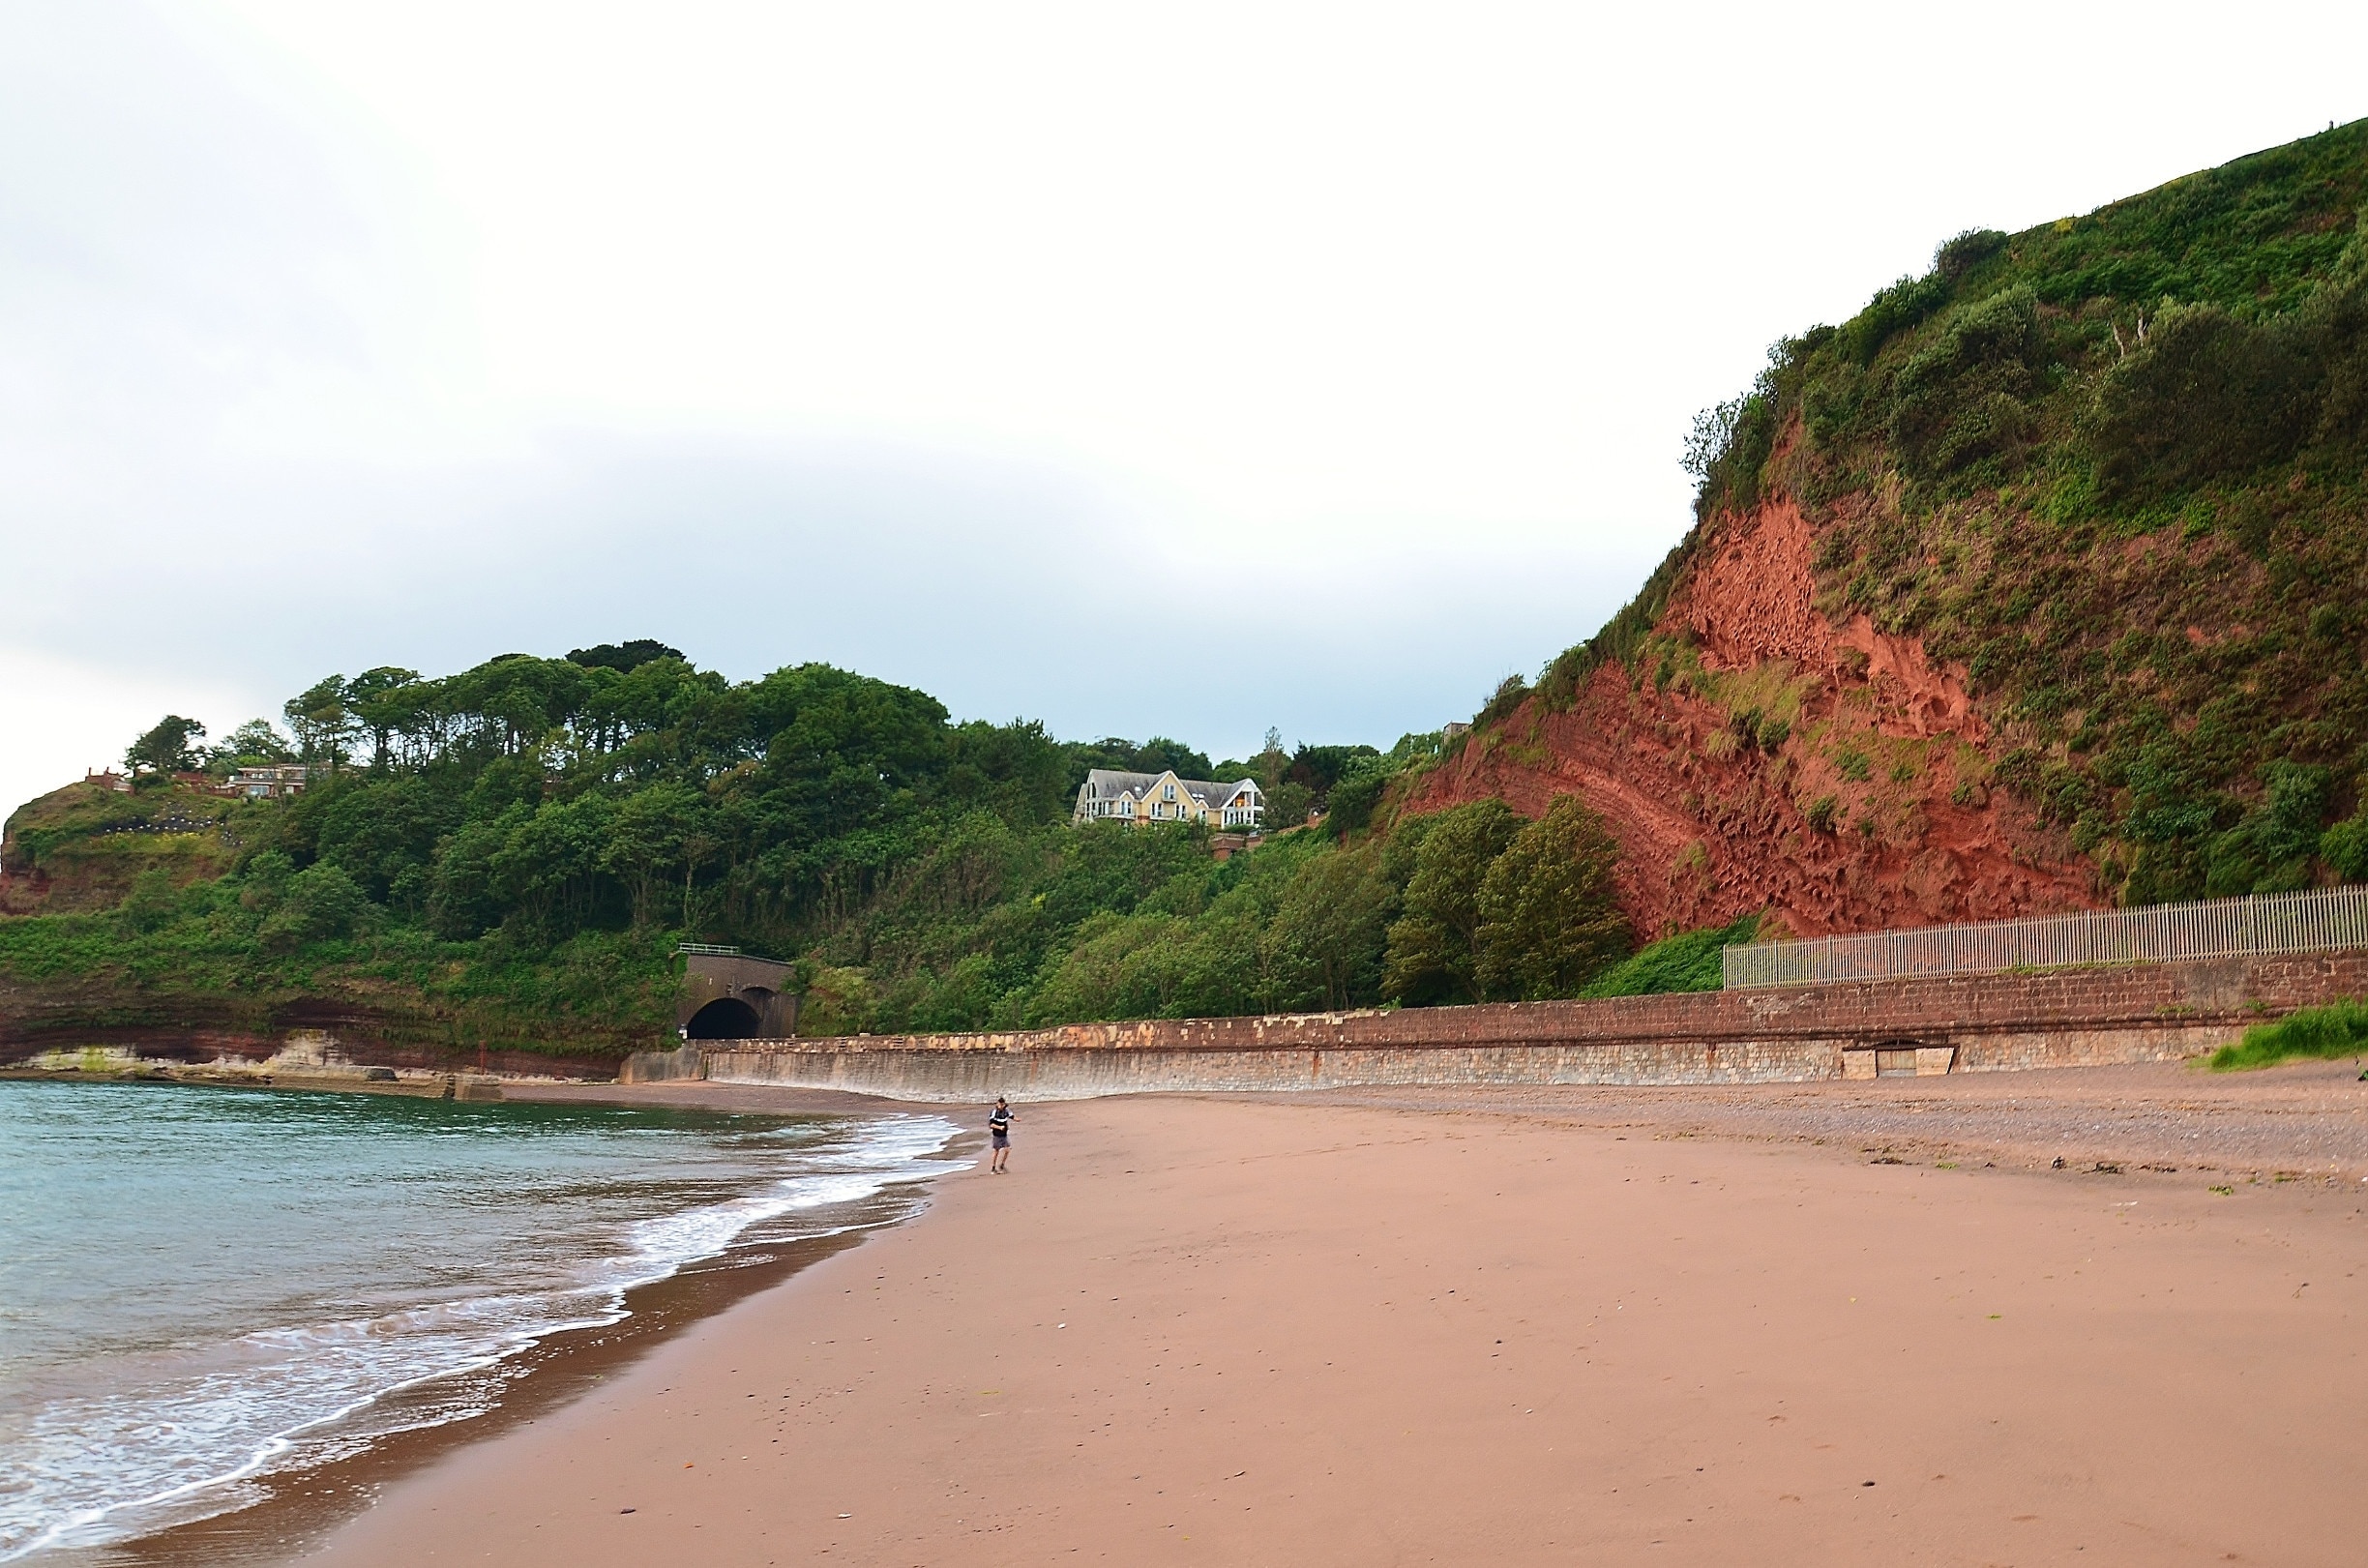 Dawlish Beach great for a nice walk and to relax.